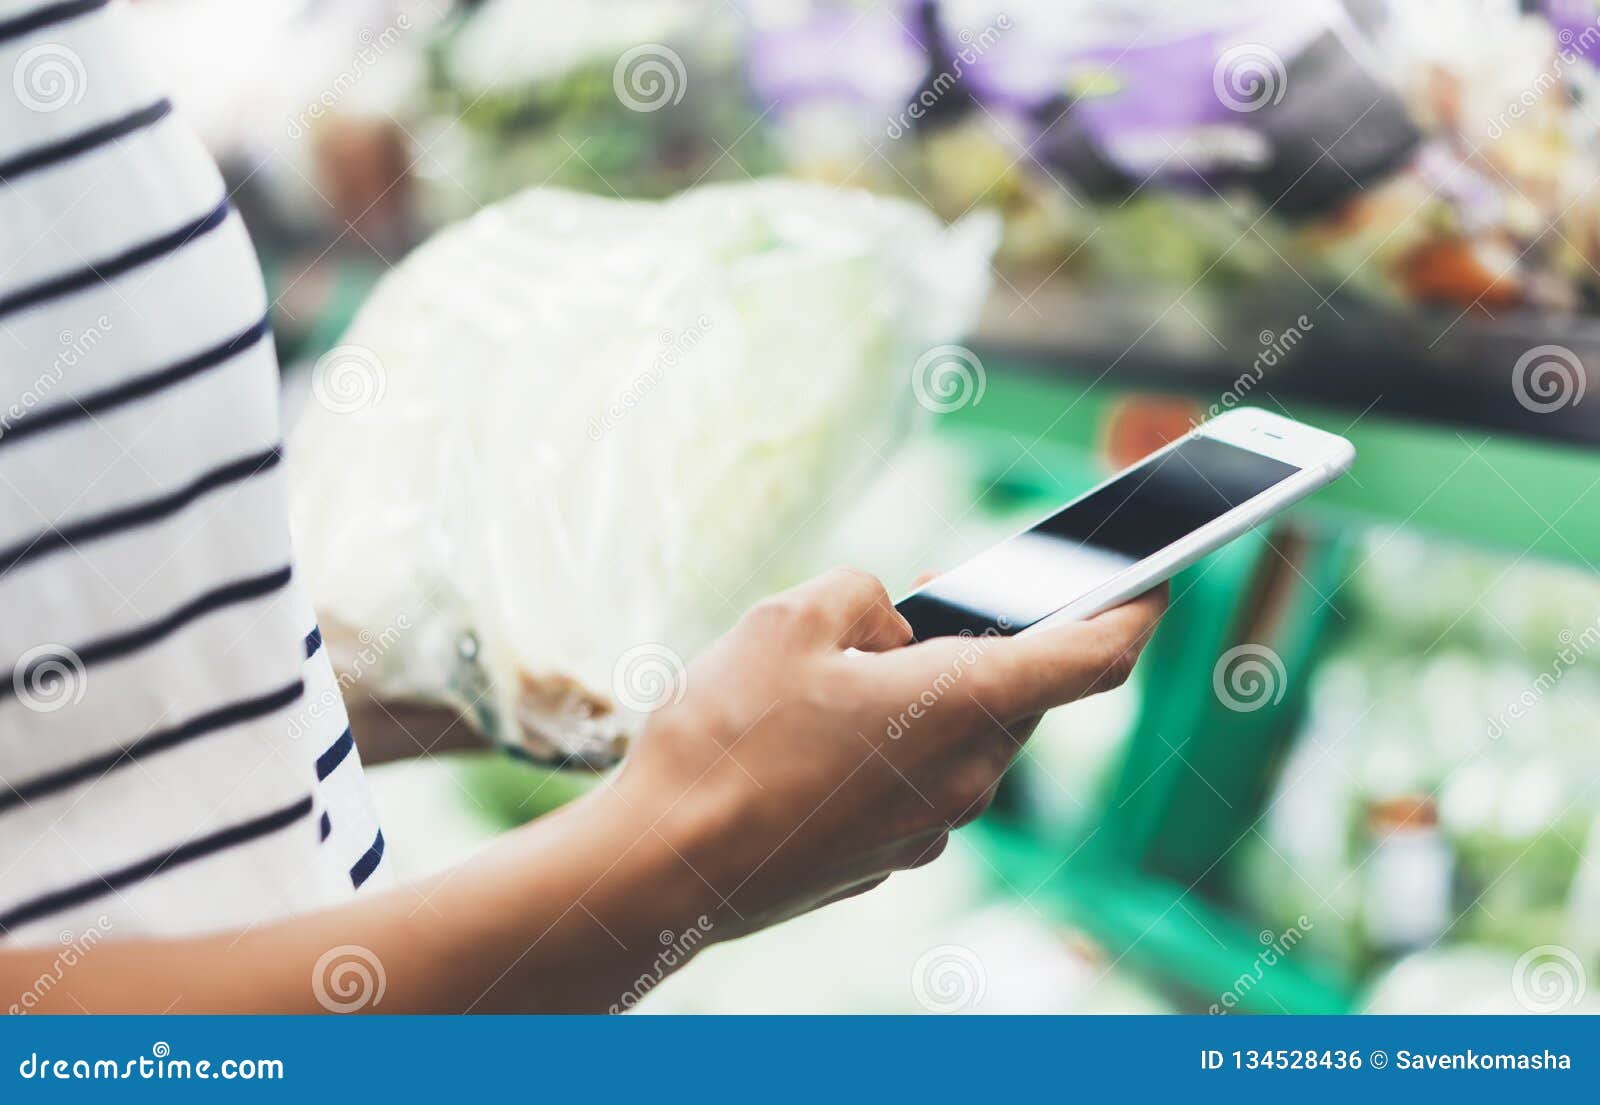 young woman shopping healthy food in supermarket blur background. female hands buy products cabagge using smartphone in store